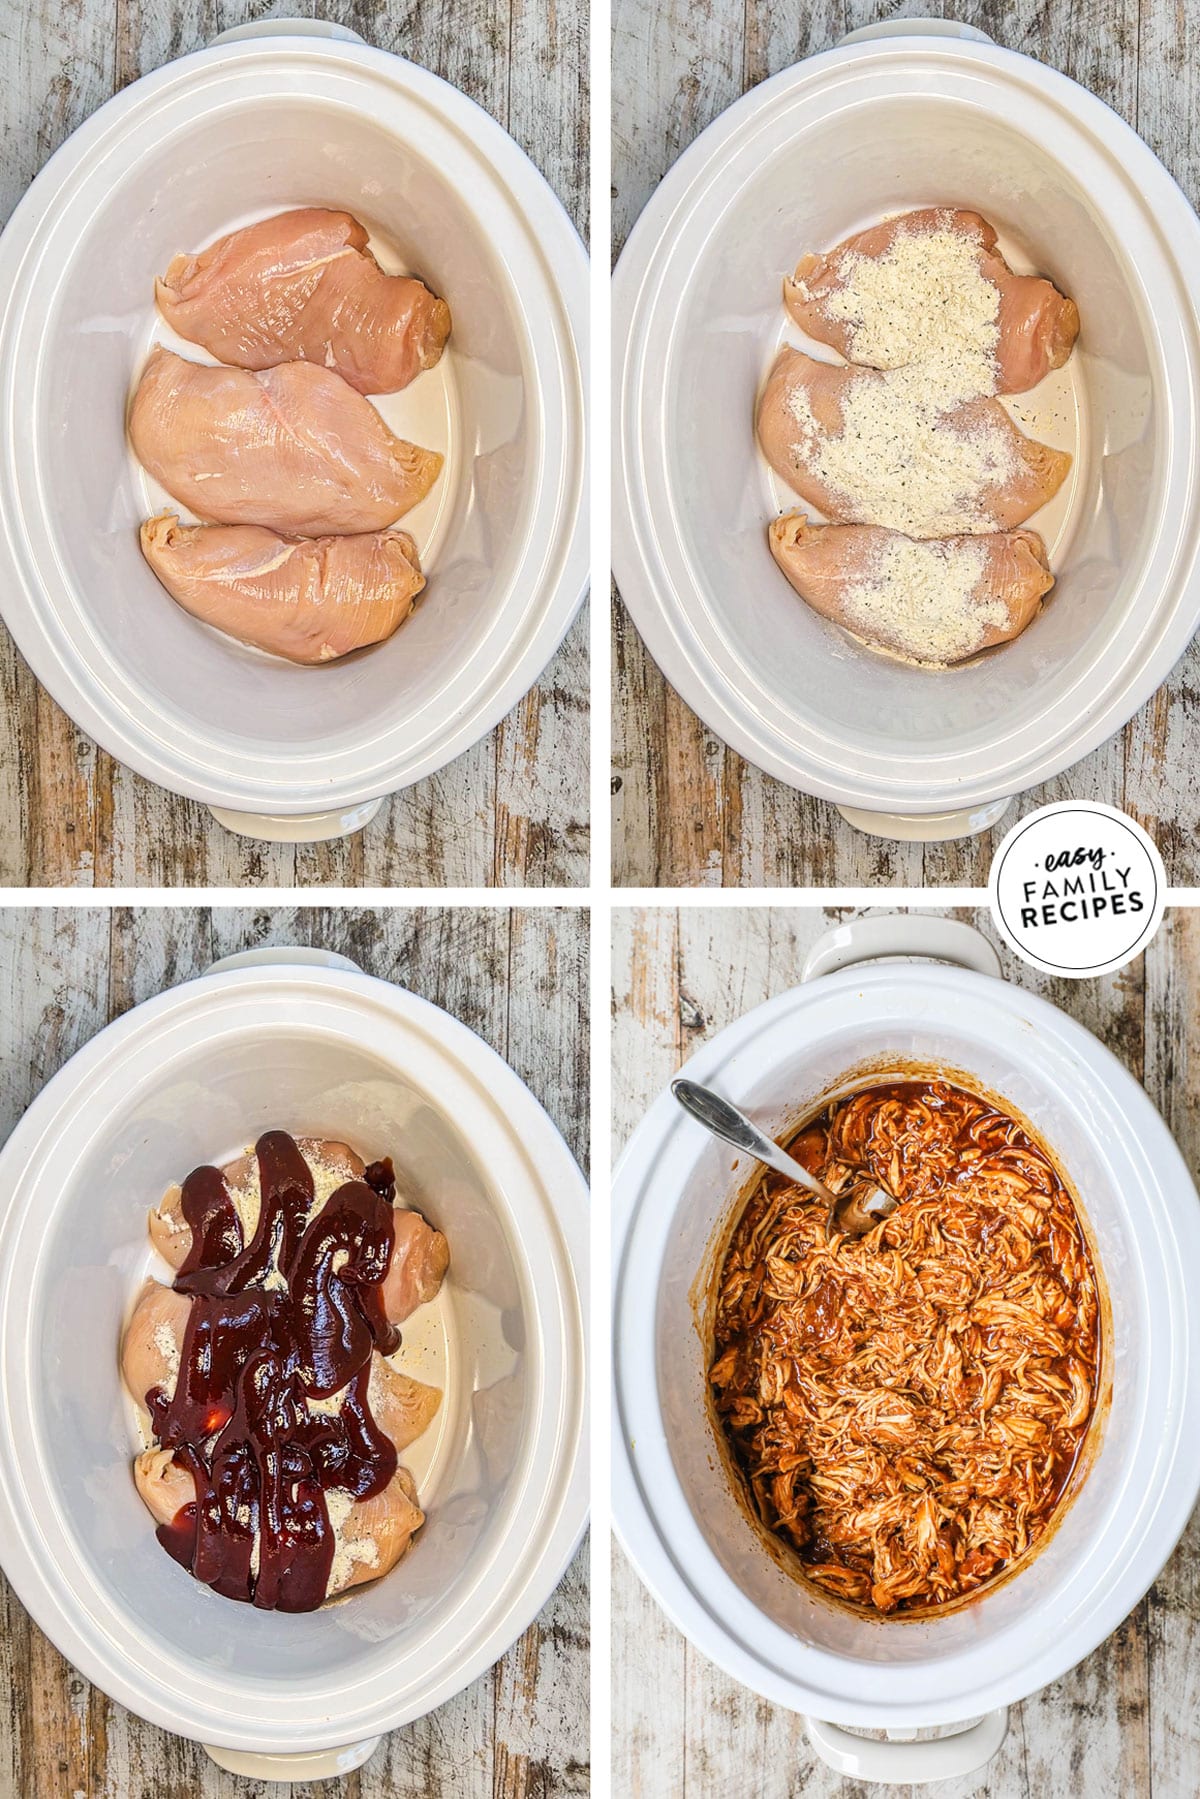 4 image collage making recipe in a crock pot: 1- 3 chicken breast in pot, 2- seasoning added, 3- bbq sauce added, 4- after cooked and chicken is shredded and mixed with bbq sauce.